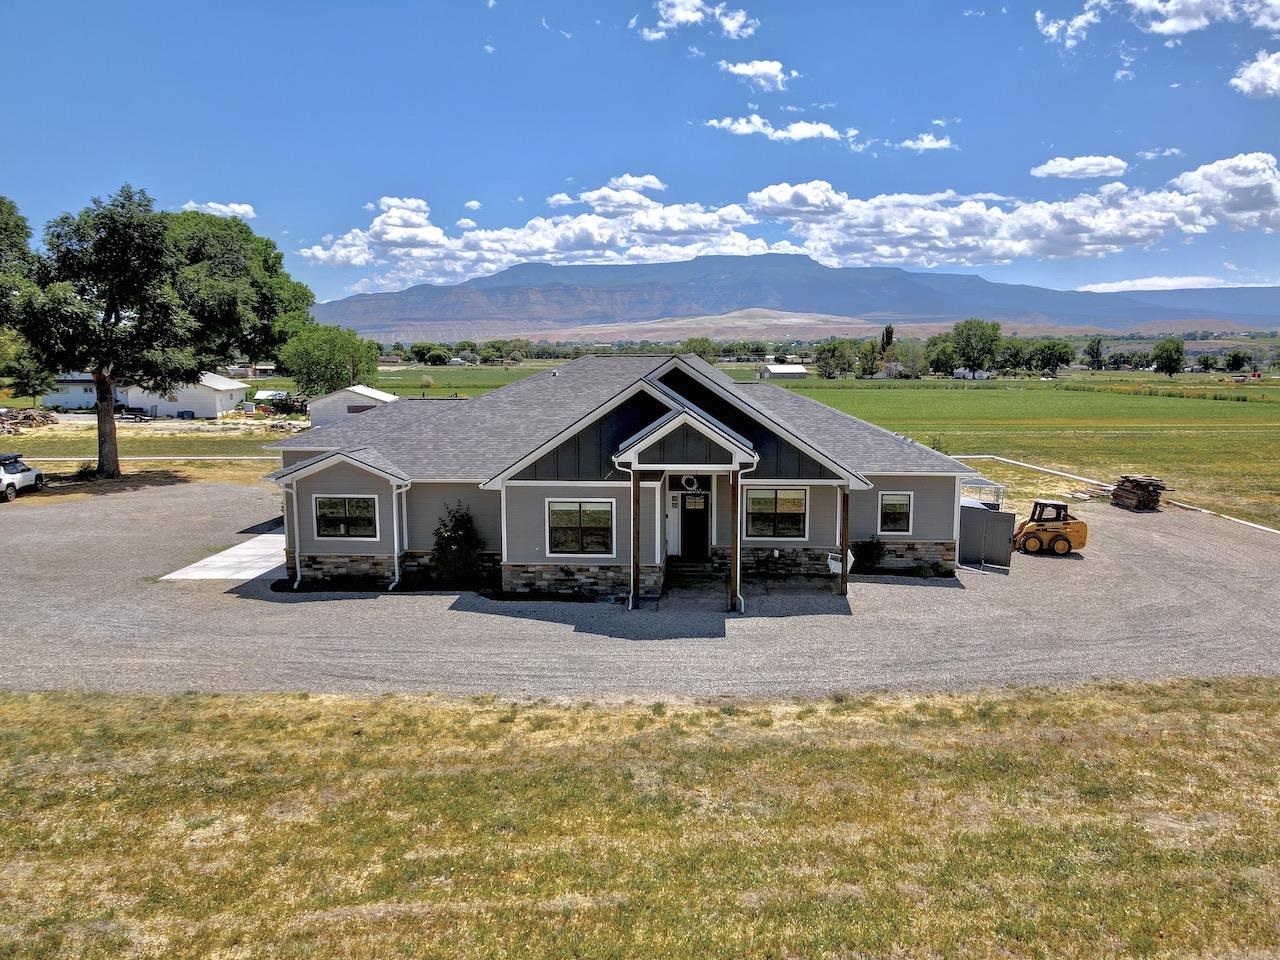 This stunning property of nearly 4 acres has outstanding views of the Grand Mesa and Mount Garfield. Offering a piece of Colorado farm country with the luxury of a one of a kind home. You will enjoy covered outdoor seating areas for sunrises or sunsets. Whether drinking coffee or sipping wine, this is the place you want to be every morning and every night.  As you walk into this gorgeous open concept home, you're met with views of the Grand Mesa that stream right in through the large picturesque living room windows. With a large dining room to fit all of your family and friends, as well as a meticulously designed dream kitchen, with beautiful custom made chiseled edge counter tops. Tucked away from the main living area, you will find your master suite, including an exceptional 5 piece ensuite bathroom, including the most beautiful finishes. Across the home are two sizable bedrooms each with walk-in closets and adjoined by a unique Jack and Jill layout.  Just a short 10 minute drive down the road past fruit orchards and the cutest farm country around, you'll find Palisade Colorado. Offering some of the best peaches and wine in the country This home is a can't miss opportunity of bliss and relaxation.  Additional remarks: No HOA. Kitchen refrigerator, stove, microwave, dishwasher, washer and dryer included. Kitchen counter tops are chiseled edge granite. Exterior walls are 2x6 with hardie concrete siding. Home is wired for cat 5 hard wired ethernet.